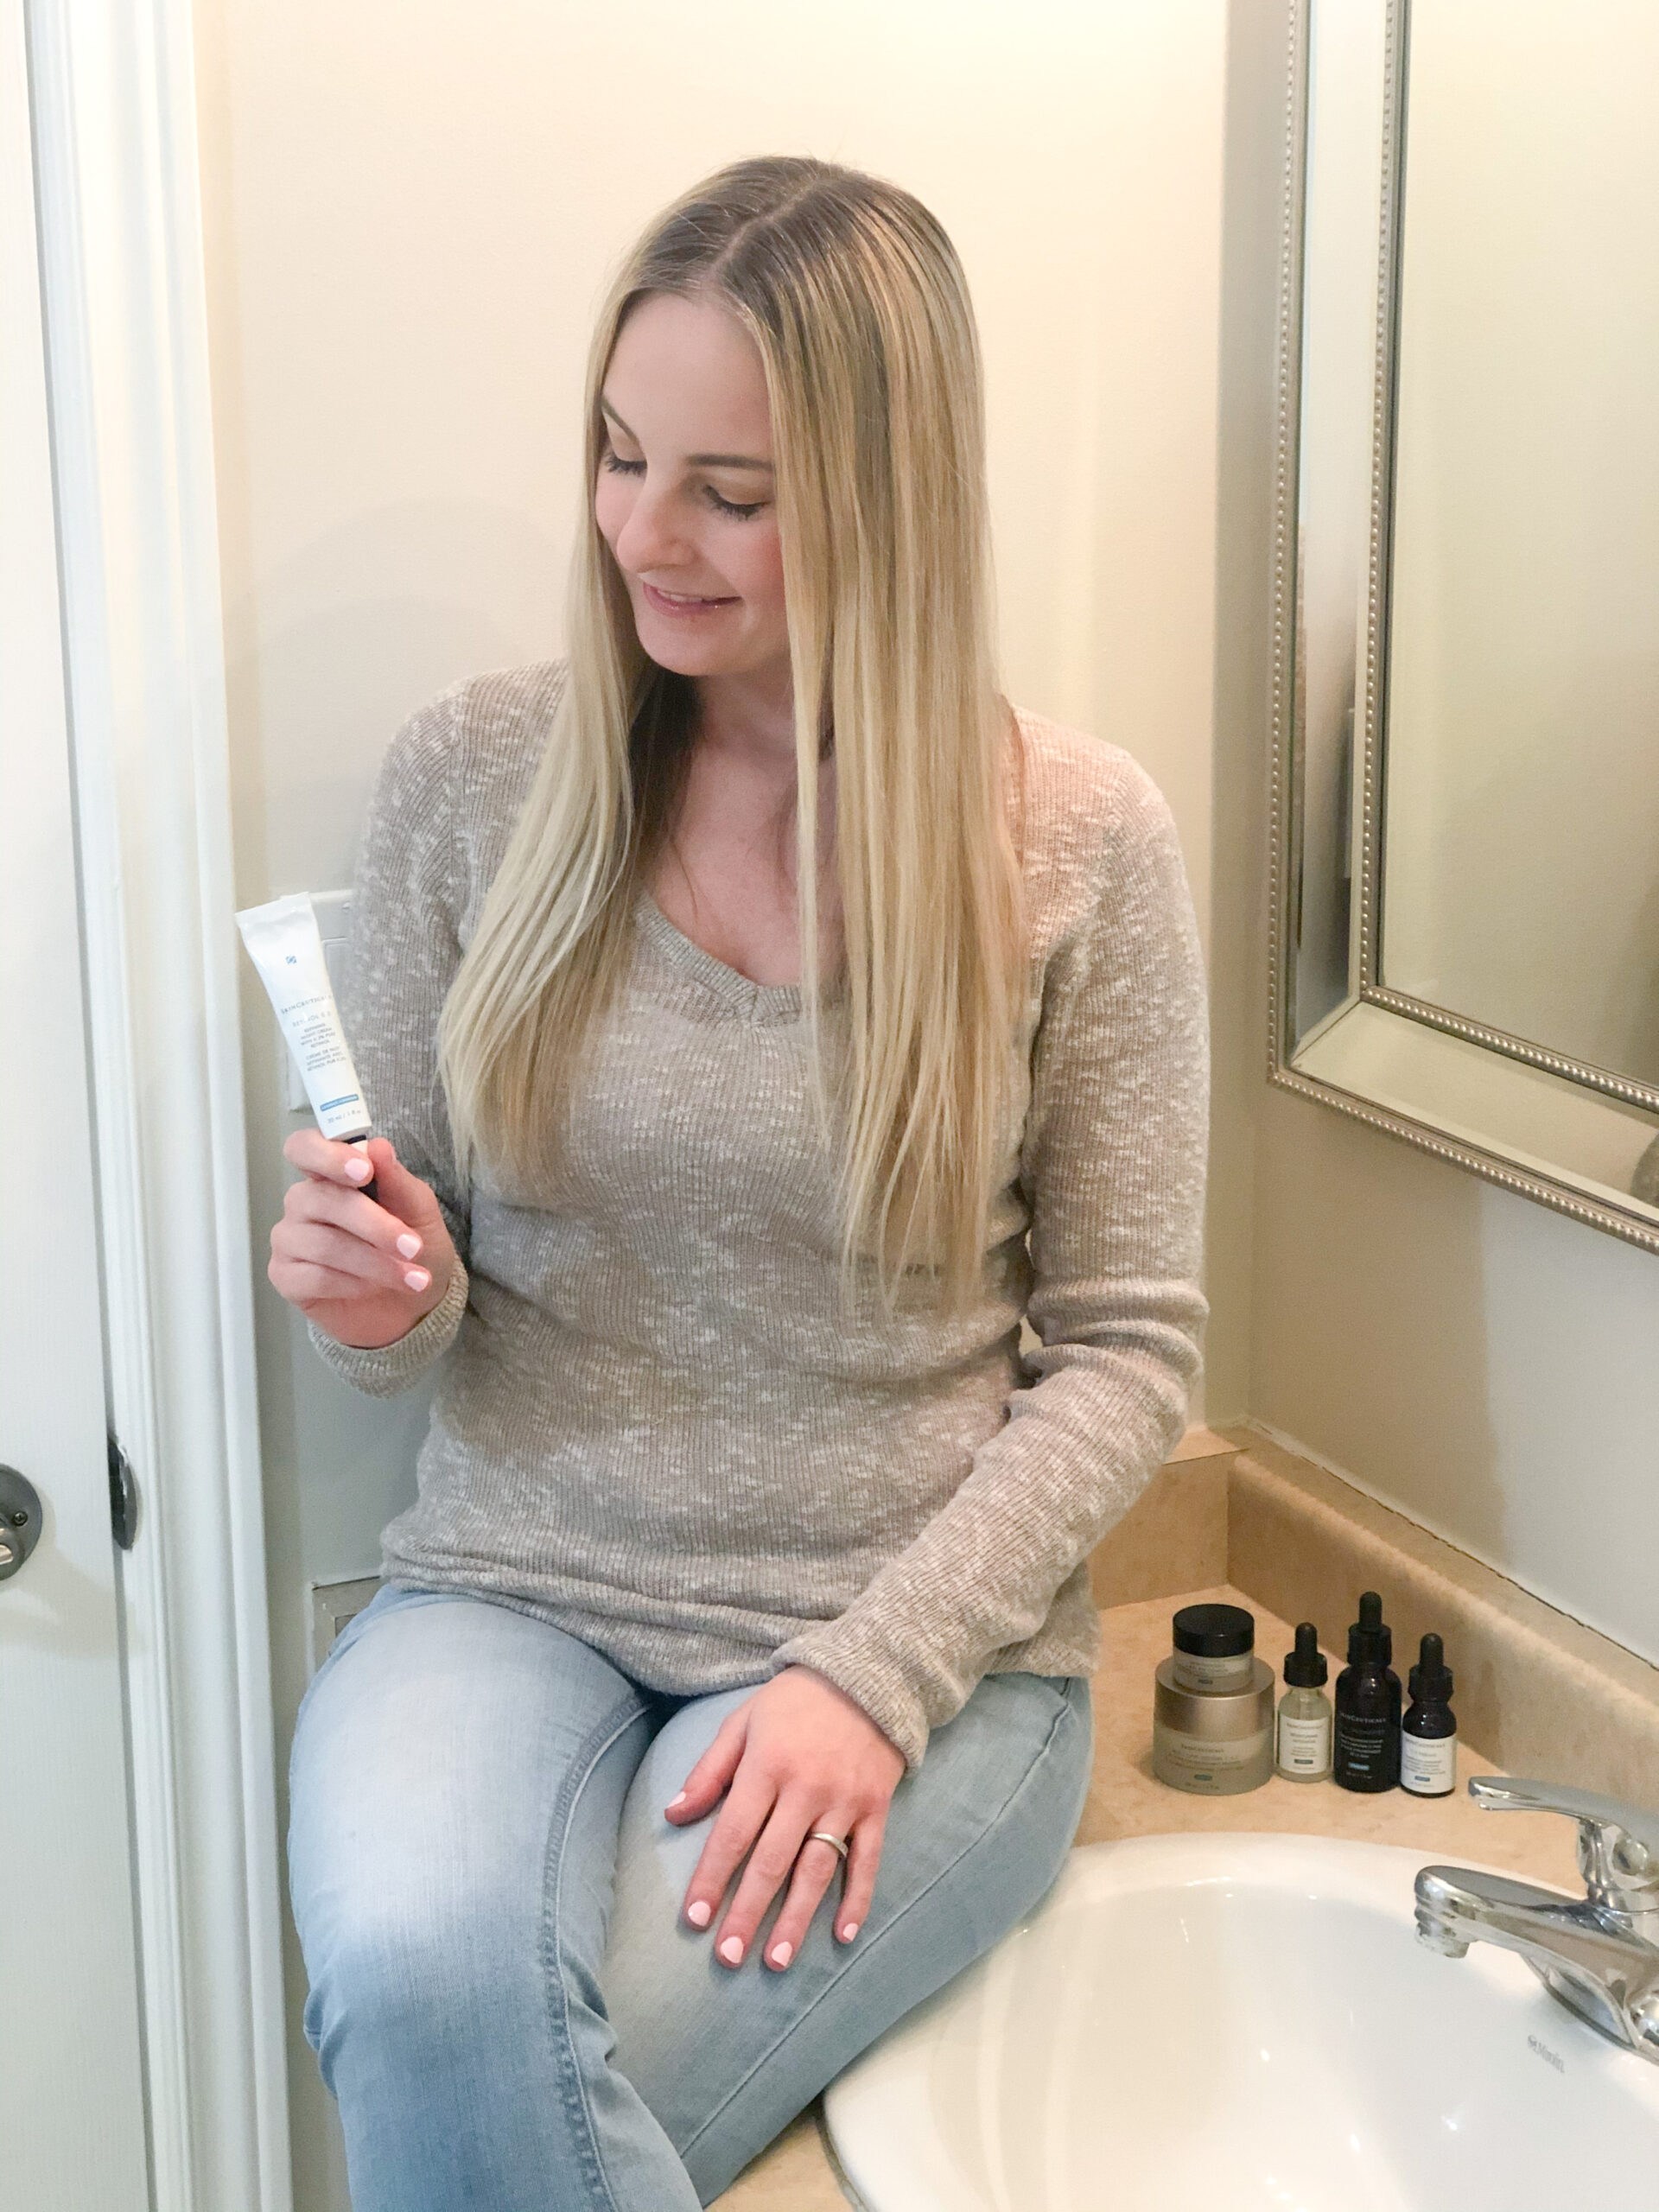 My Skin Care Routine with SkinCeuticals on Livin' Life with style